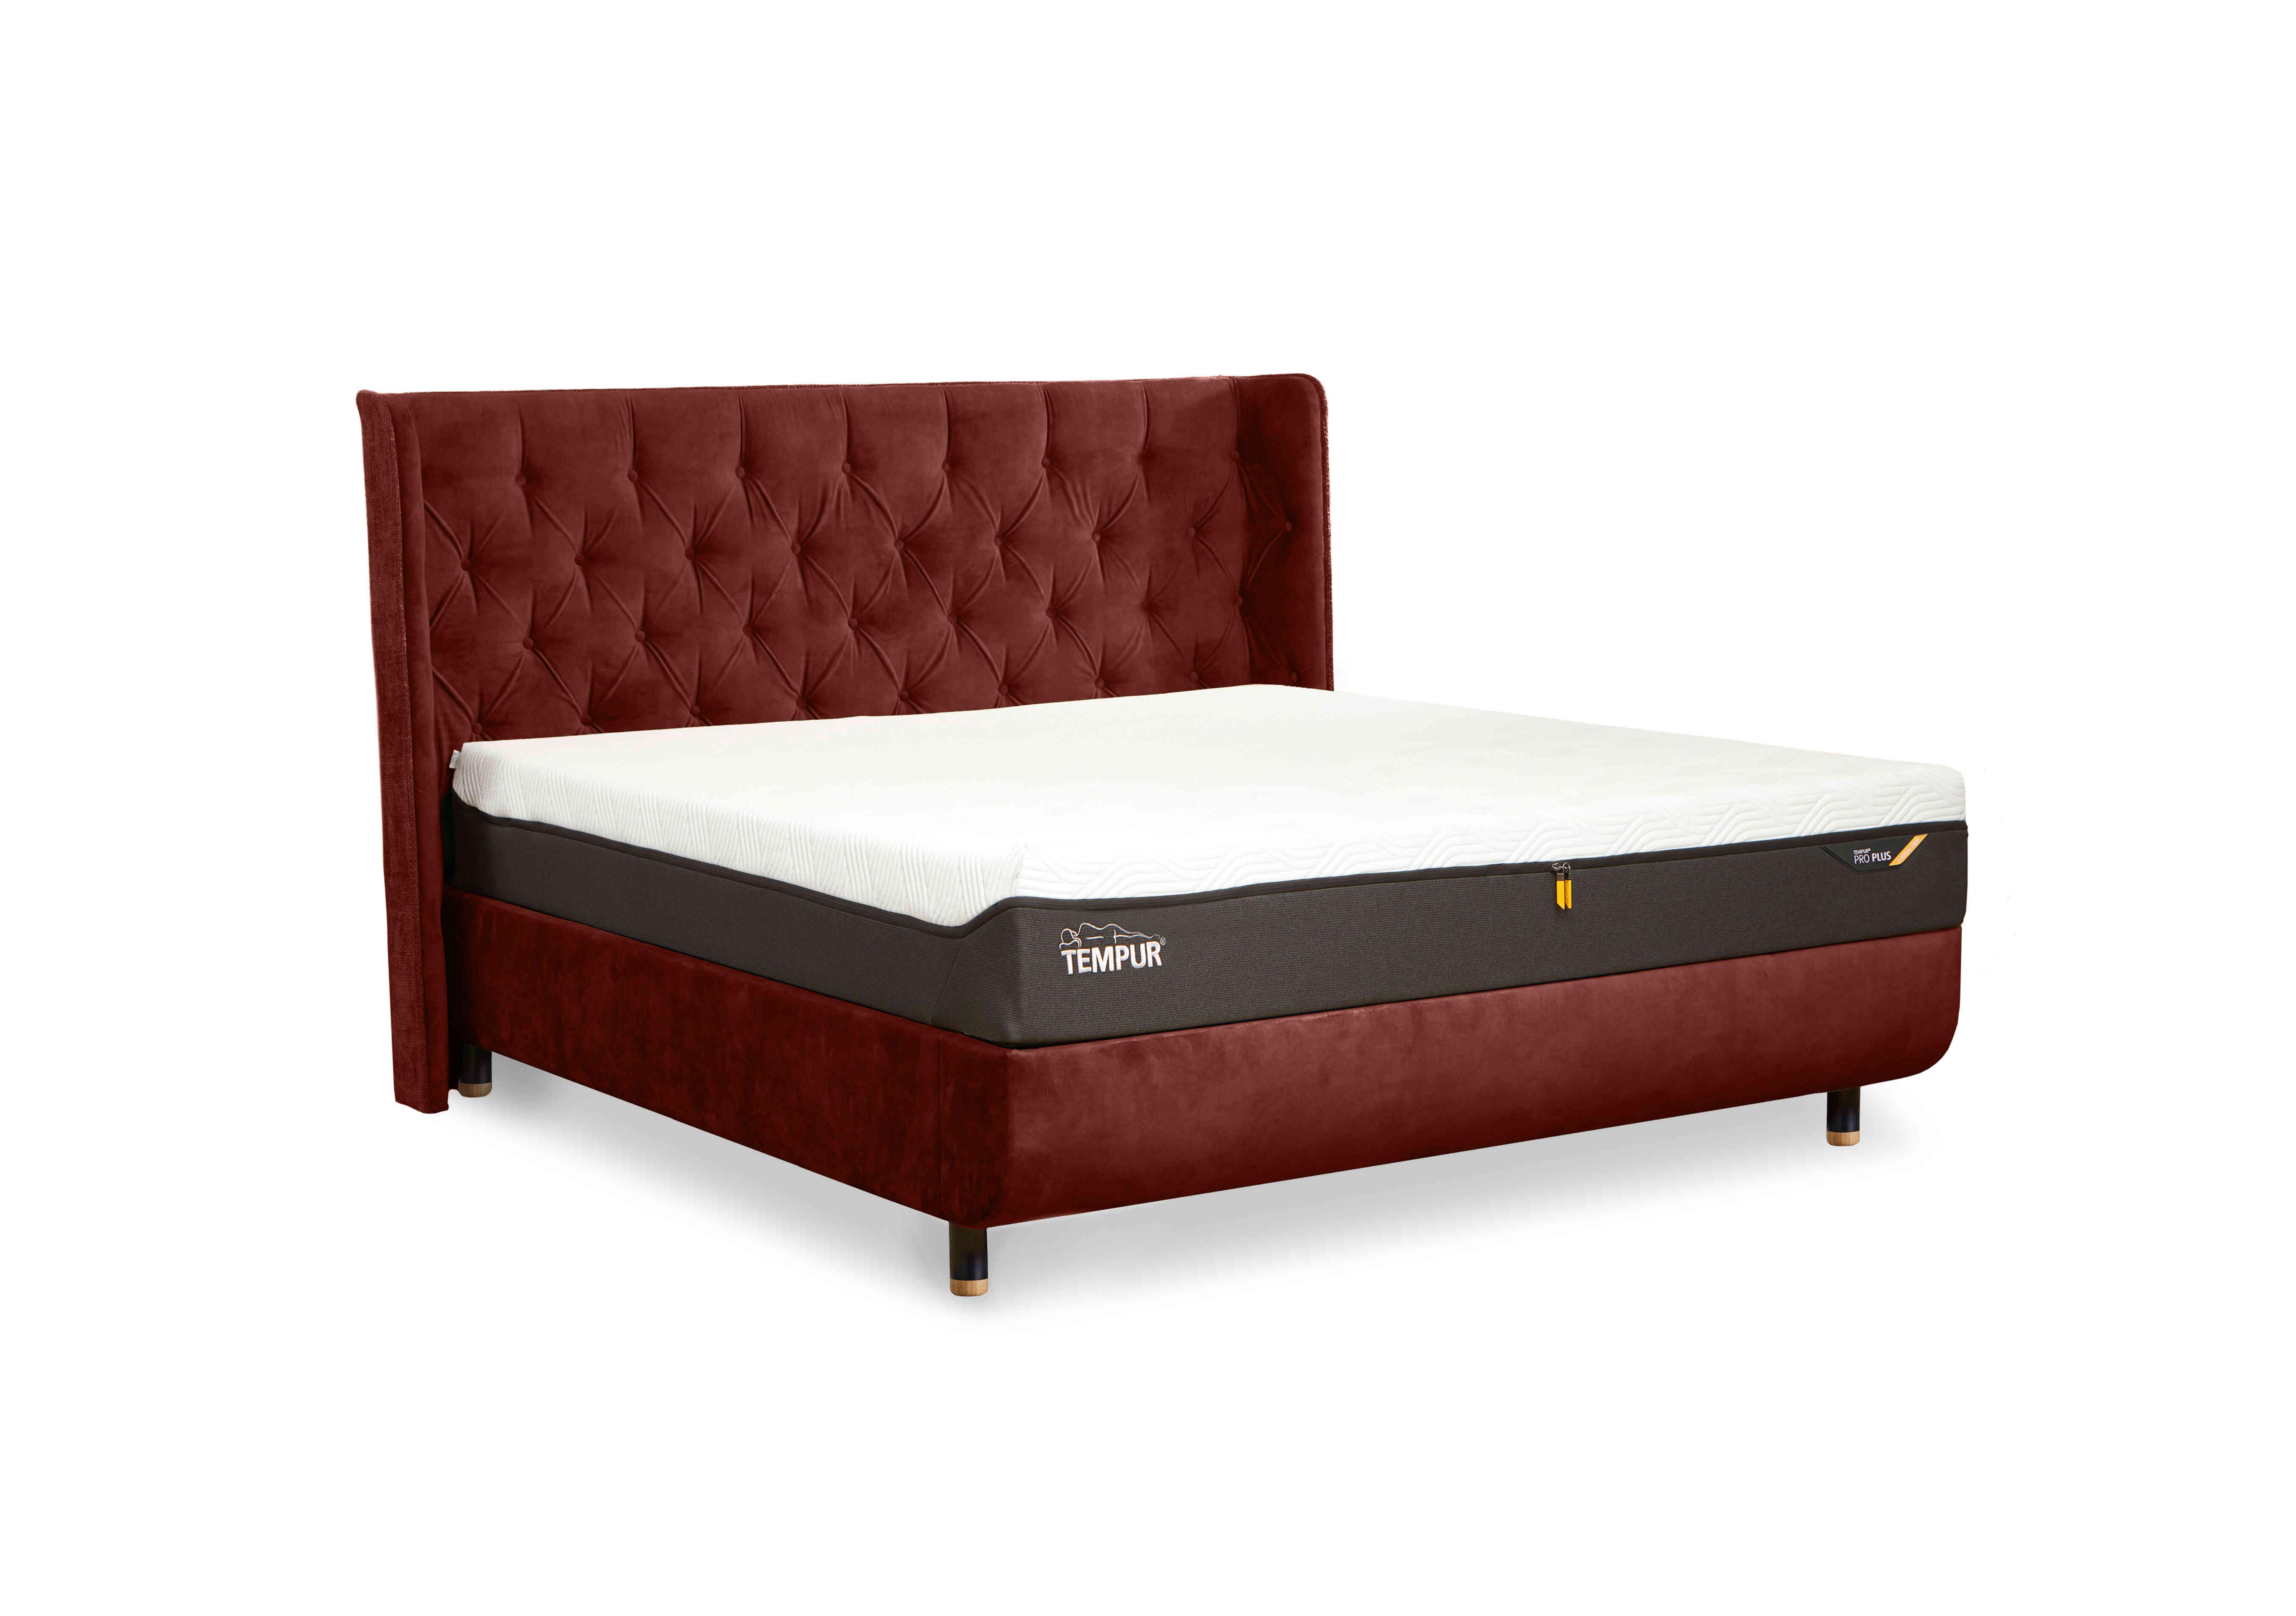 Arc Slatted Ottoman Bed Frame with Luxury Headboard in Copper/Copper Red-Nat Ash Ft on Furniture Village